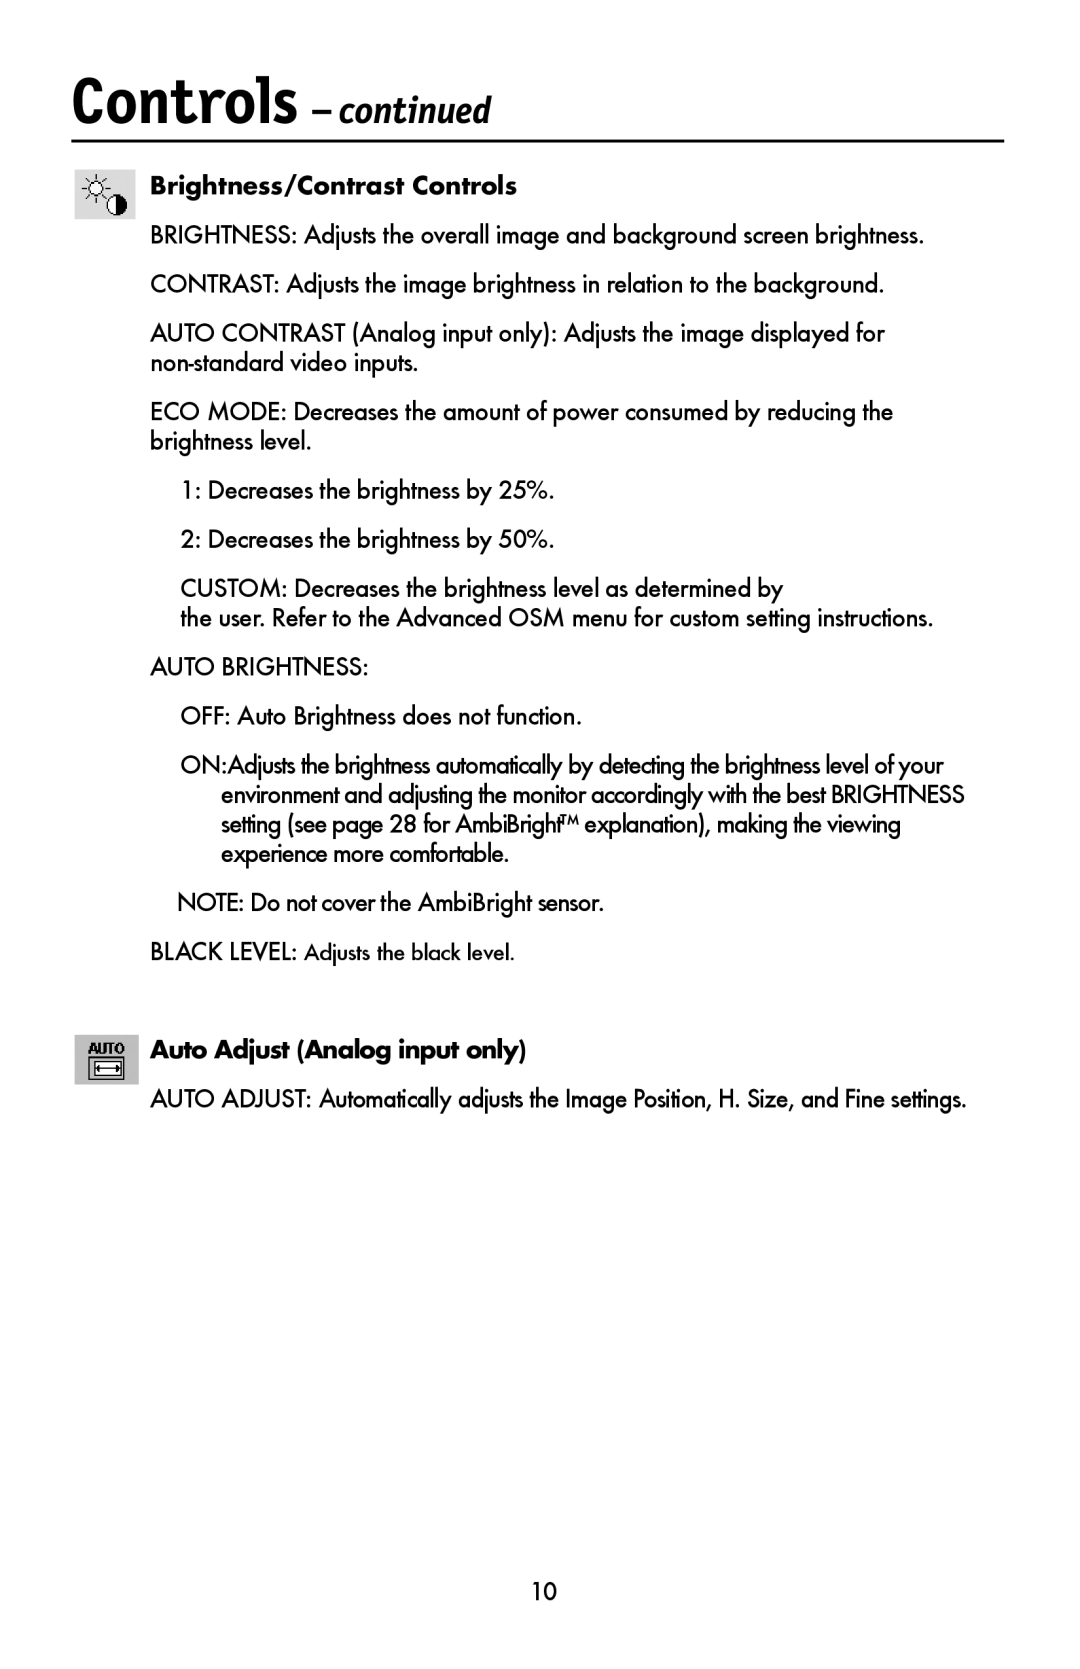 NEC LCD1990FXTM user manual Controls - continued, Brightness/Contrast Controls, Auto Adjust Analog input only 